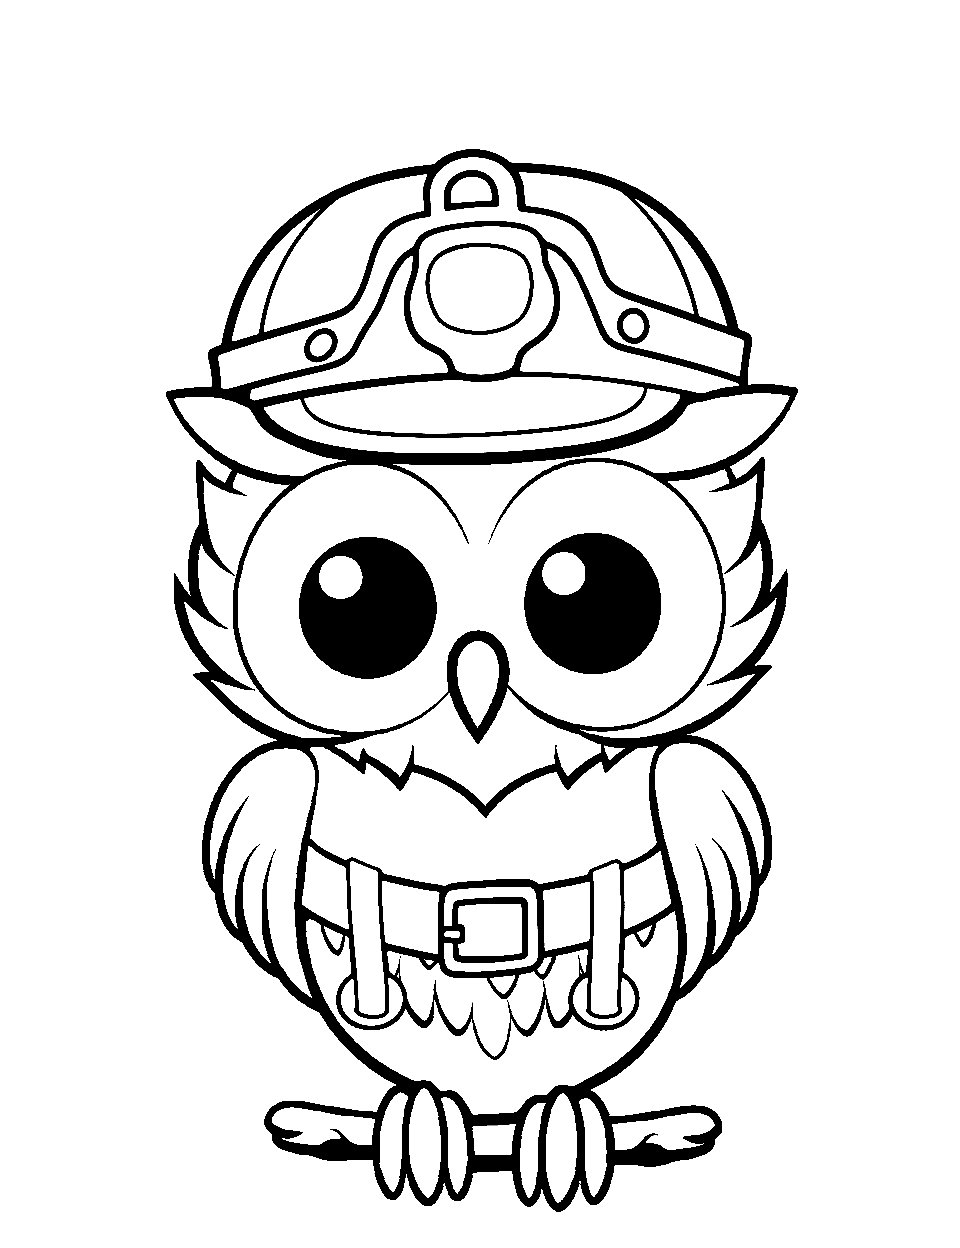 Firefighter Owl Coloring Page - An owl dressed in firefighter gear, ready for action.